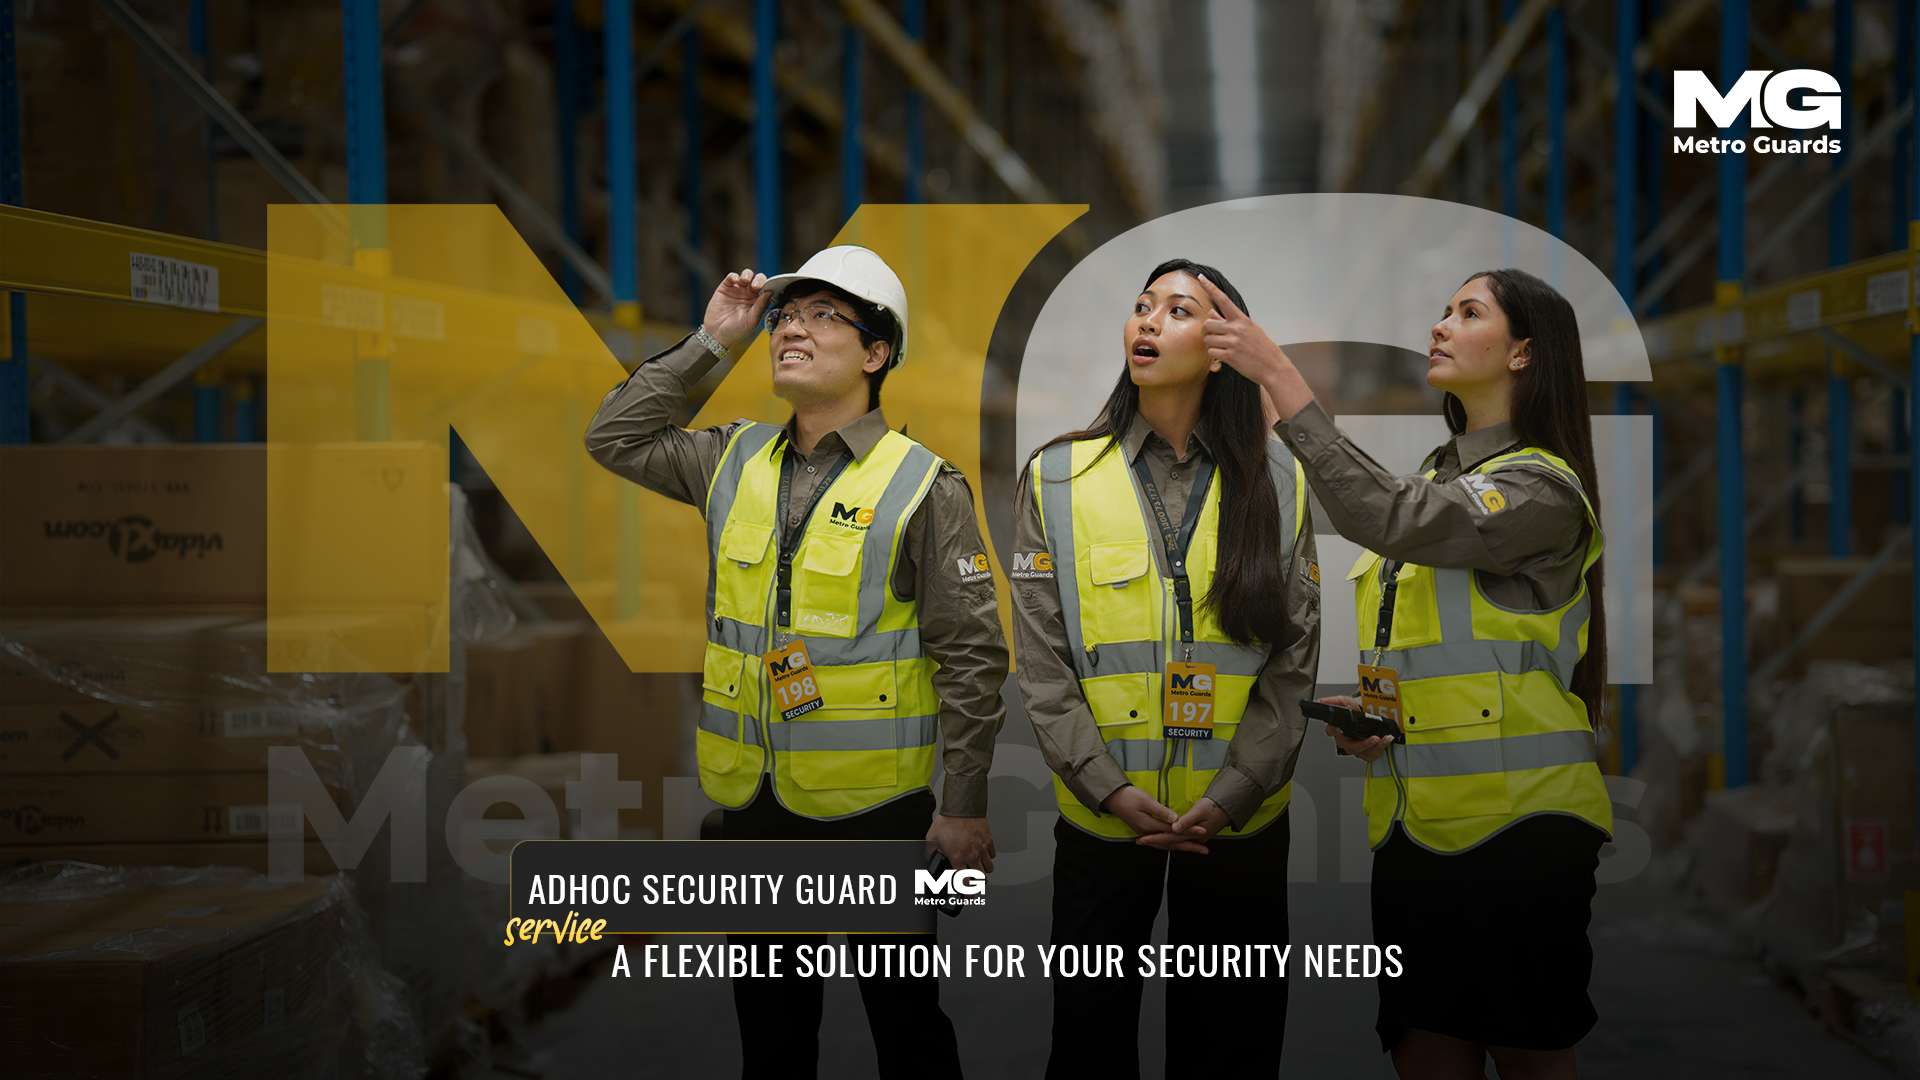 Adhoc Security Guard Service: A Flexible Solution for Your Security Needs